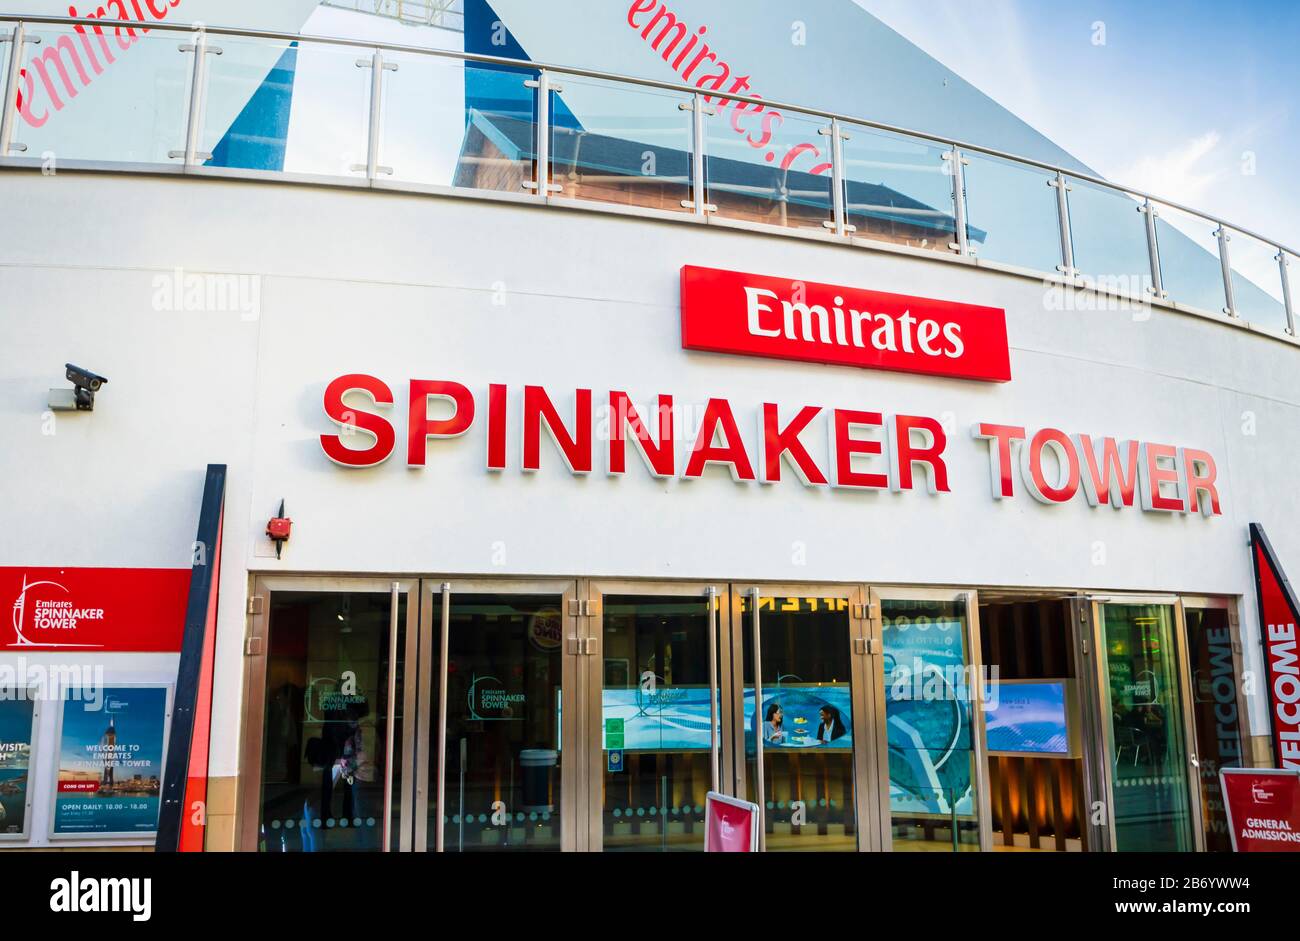 Base of the Emirates Spinnaker Tower, a landmark observation tower on the coast at Gunwharf Quays shopping centre, Portsmouth Harbour, Hants, UK Stock Photo